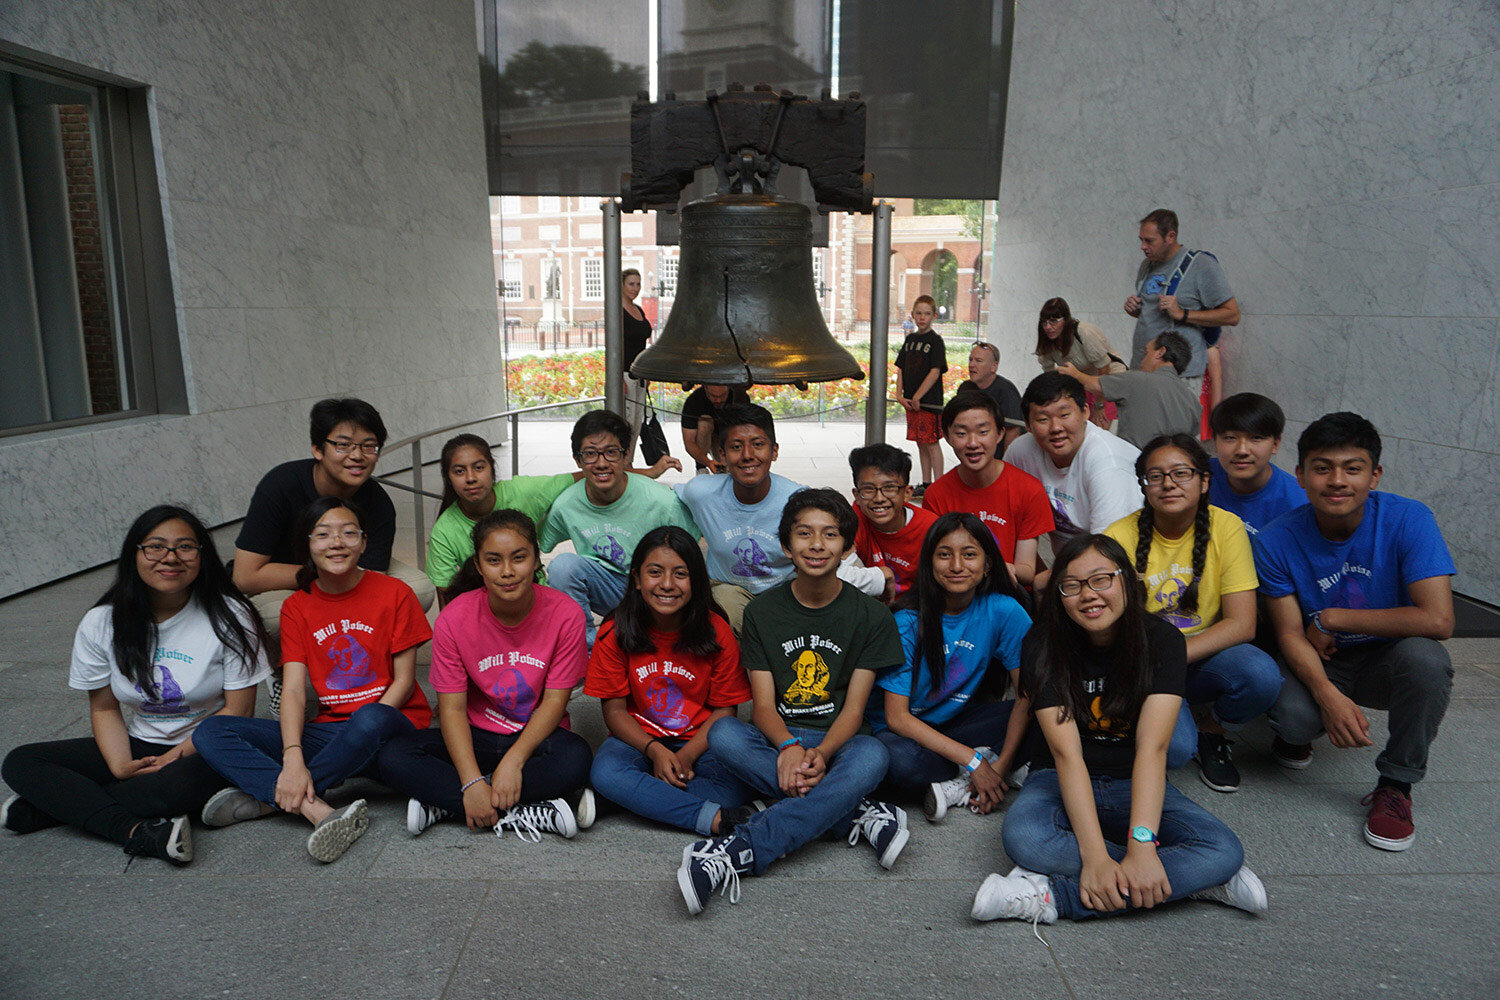  Let Freedom Ring: The Liberty Bell, Independence National Historic Park 